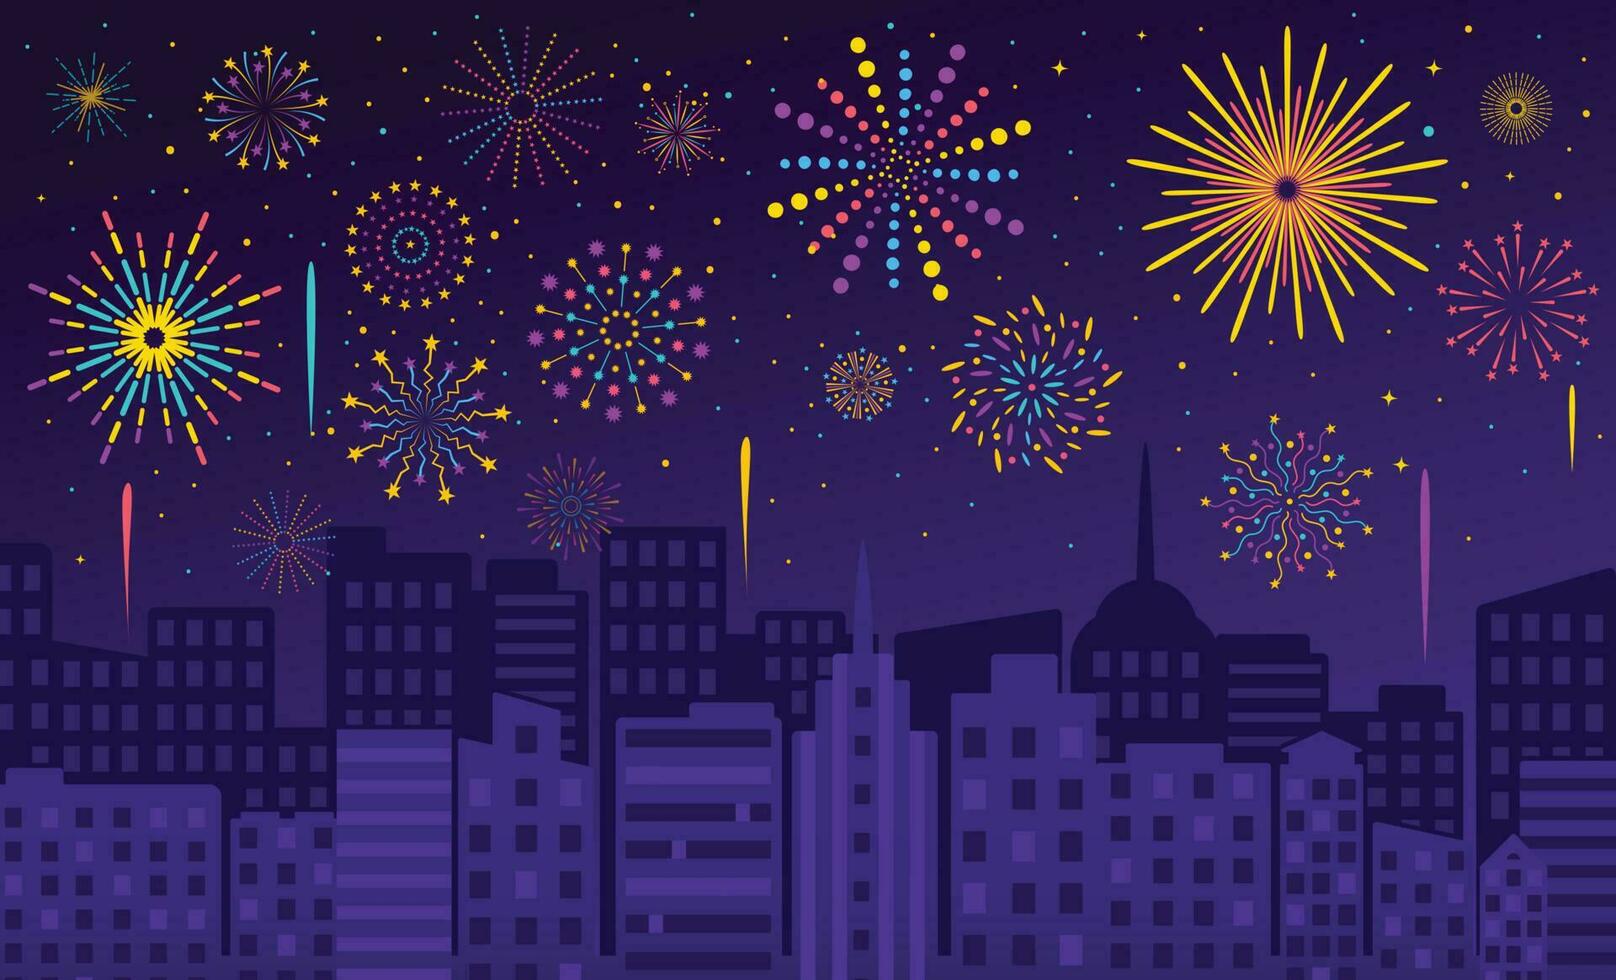 Fireworks over city, night sky with firework display. Carnival, party celebration, festive firecrackers evening cityscape vector illustration